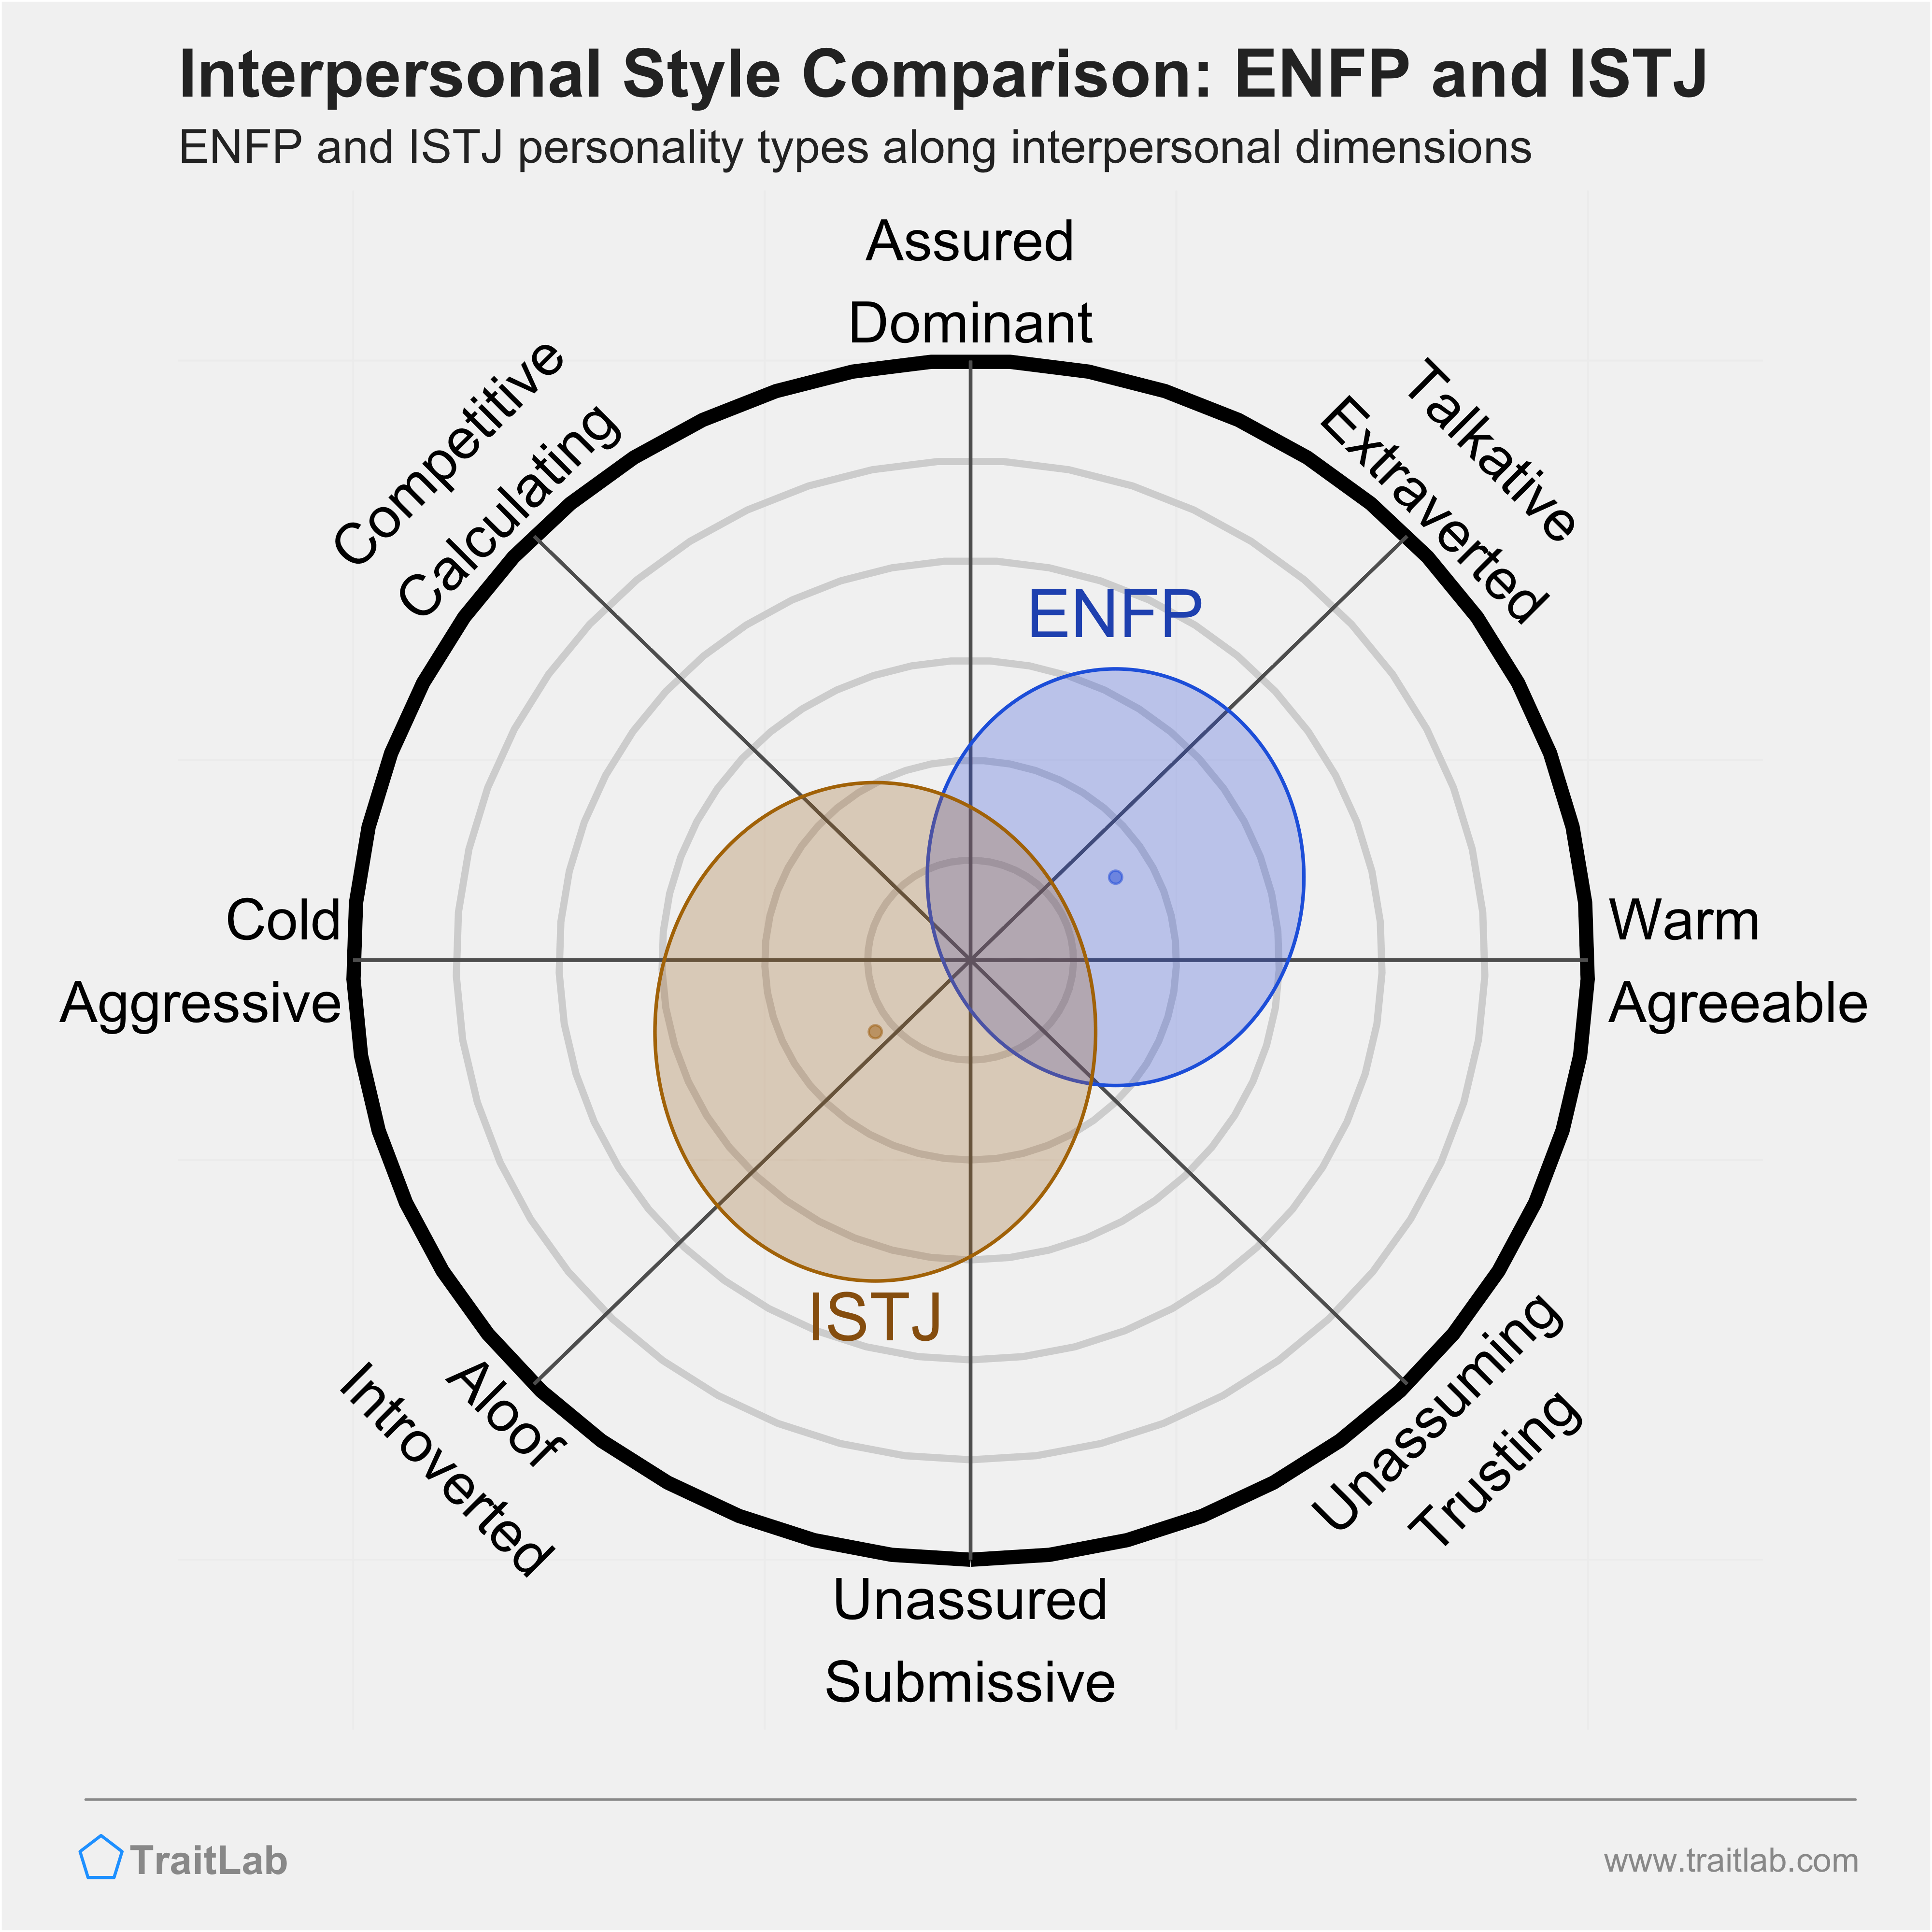 ENFP and ISTJ comparison across interpersonal dimensions